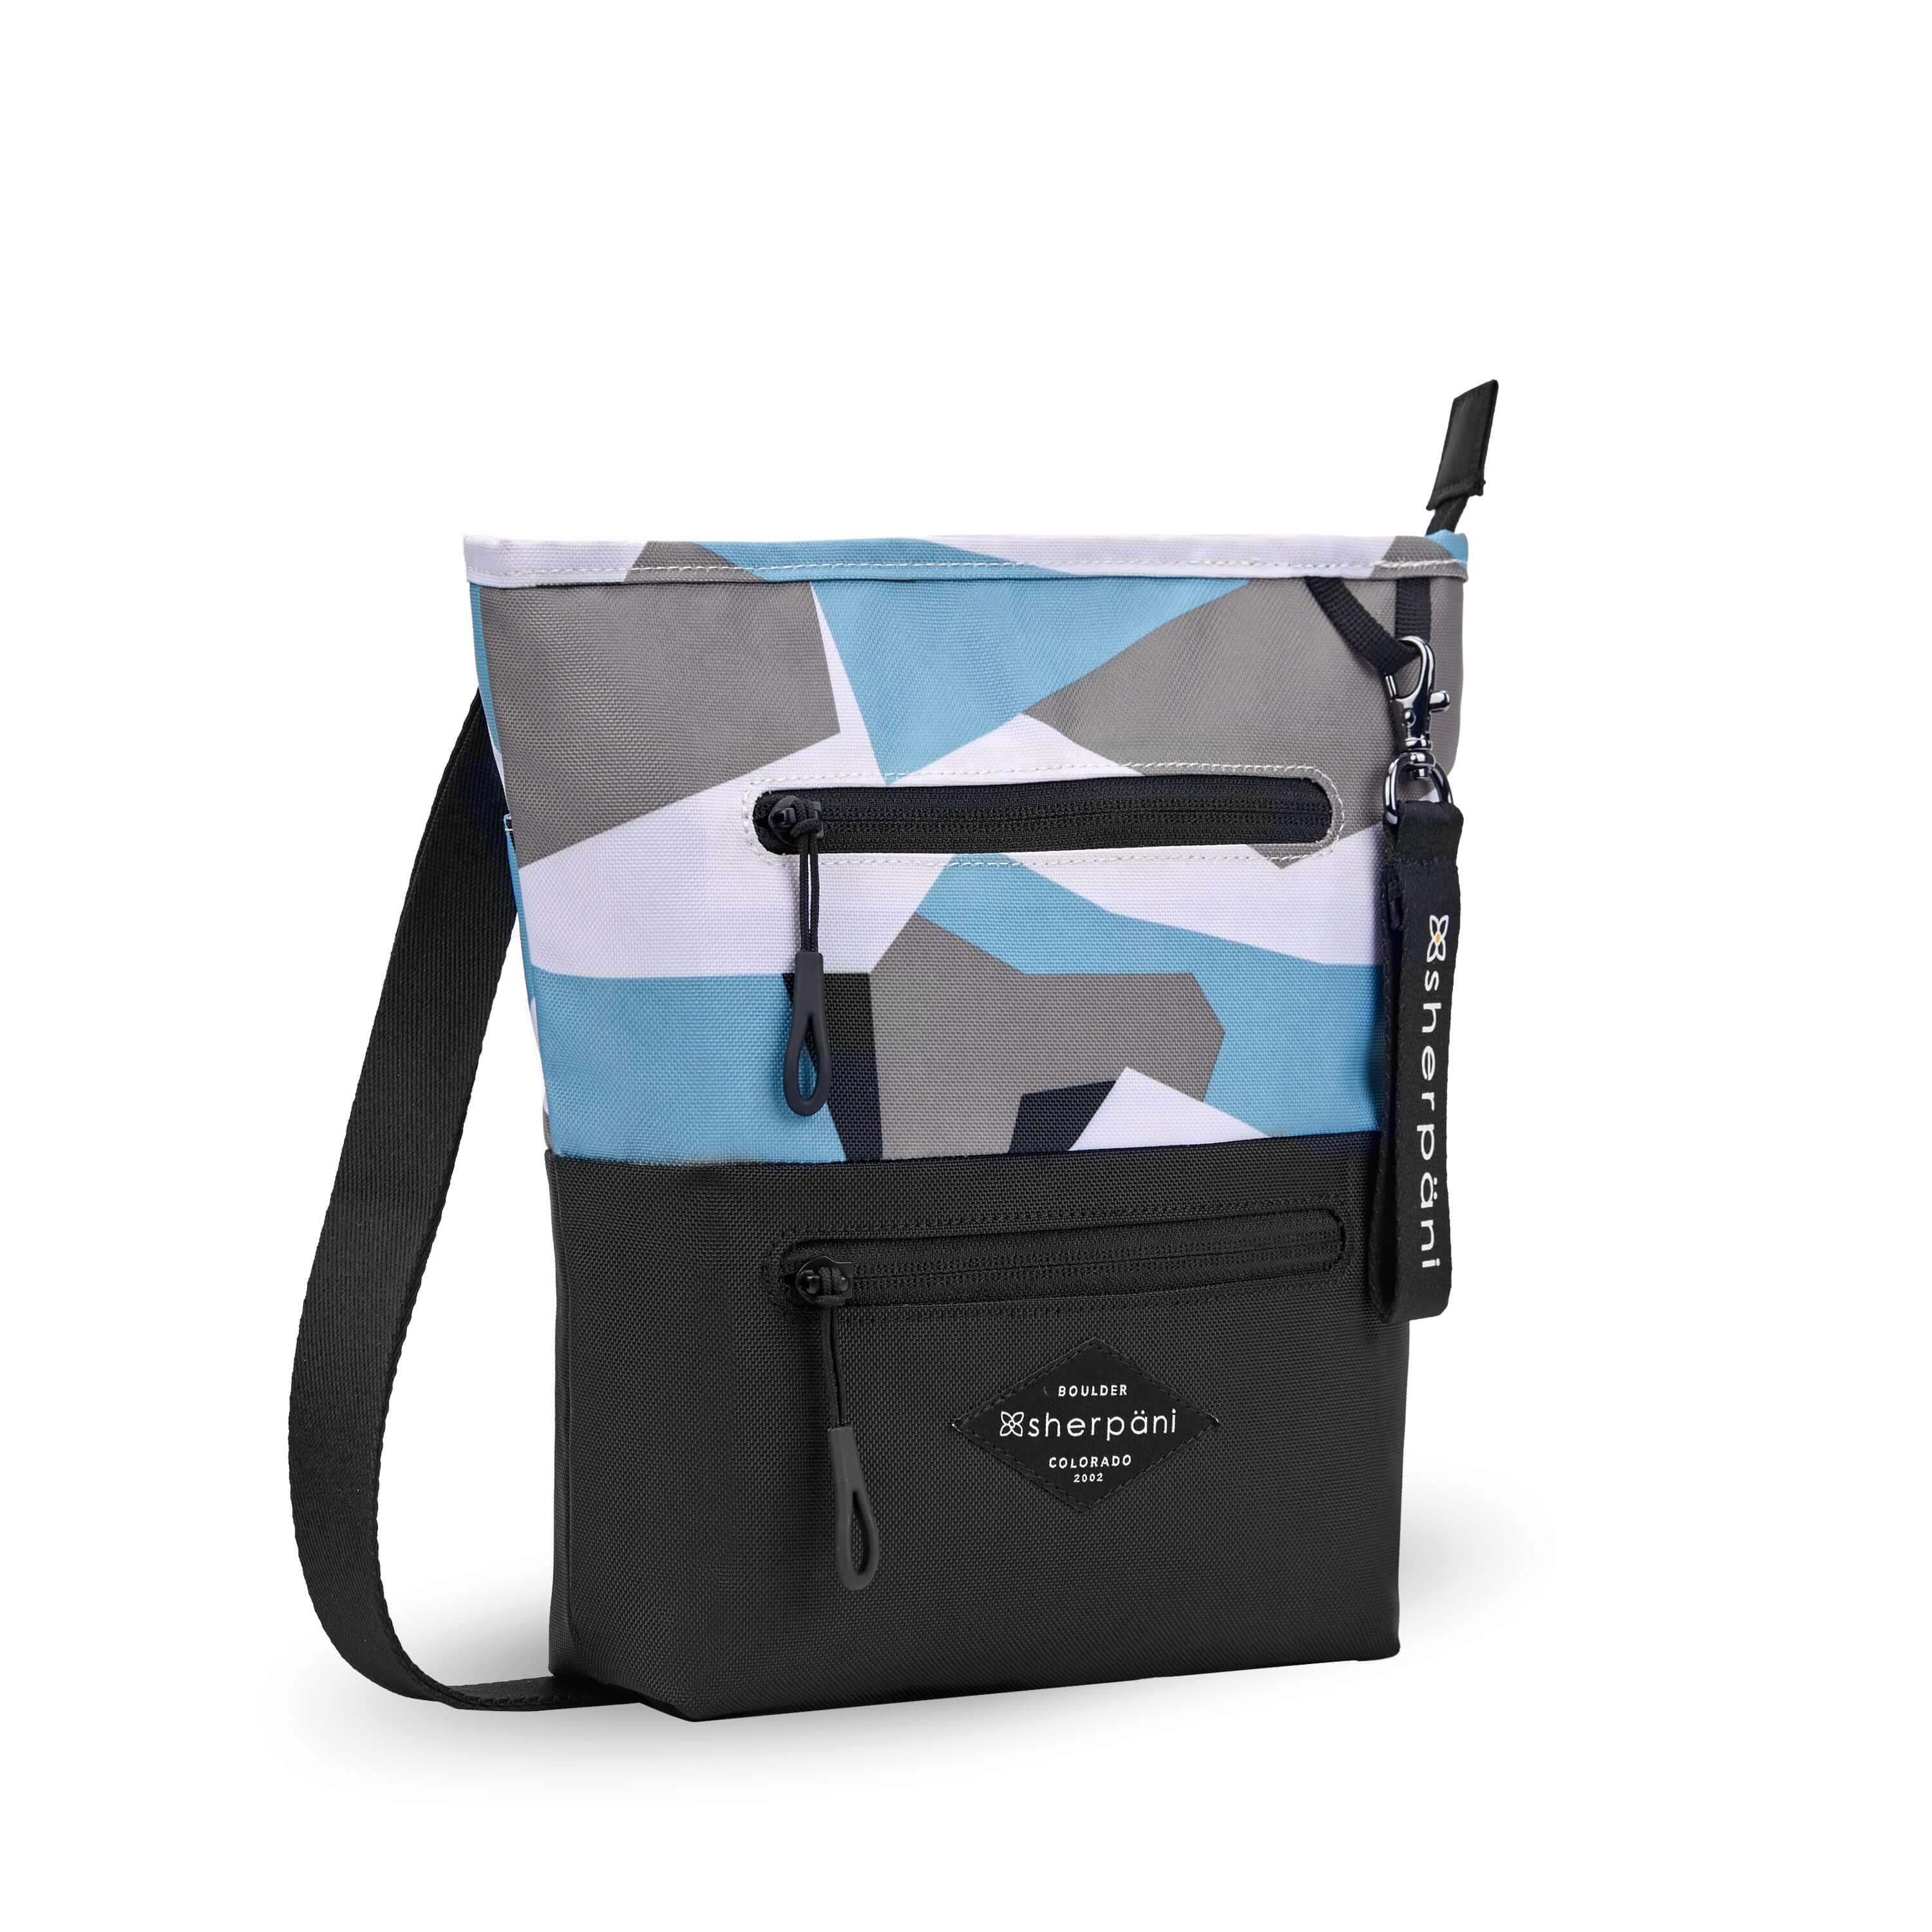 Angled front view of Sherpani’s crossbody, the Sadie, in Summer Camo. The top half of the bag is a camouflage pattern of white, gray and light blue, the bottom half of the bag is black. It features two exterior zipper pockets on the front panel with easy-pull zippers accented in black. A Sherpani branded keychain is attached to a fabric loop in the upper right corner. It has an adjustable crossbody strap.